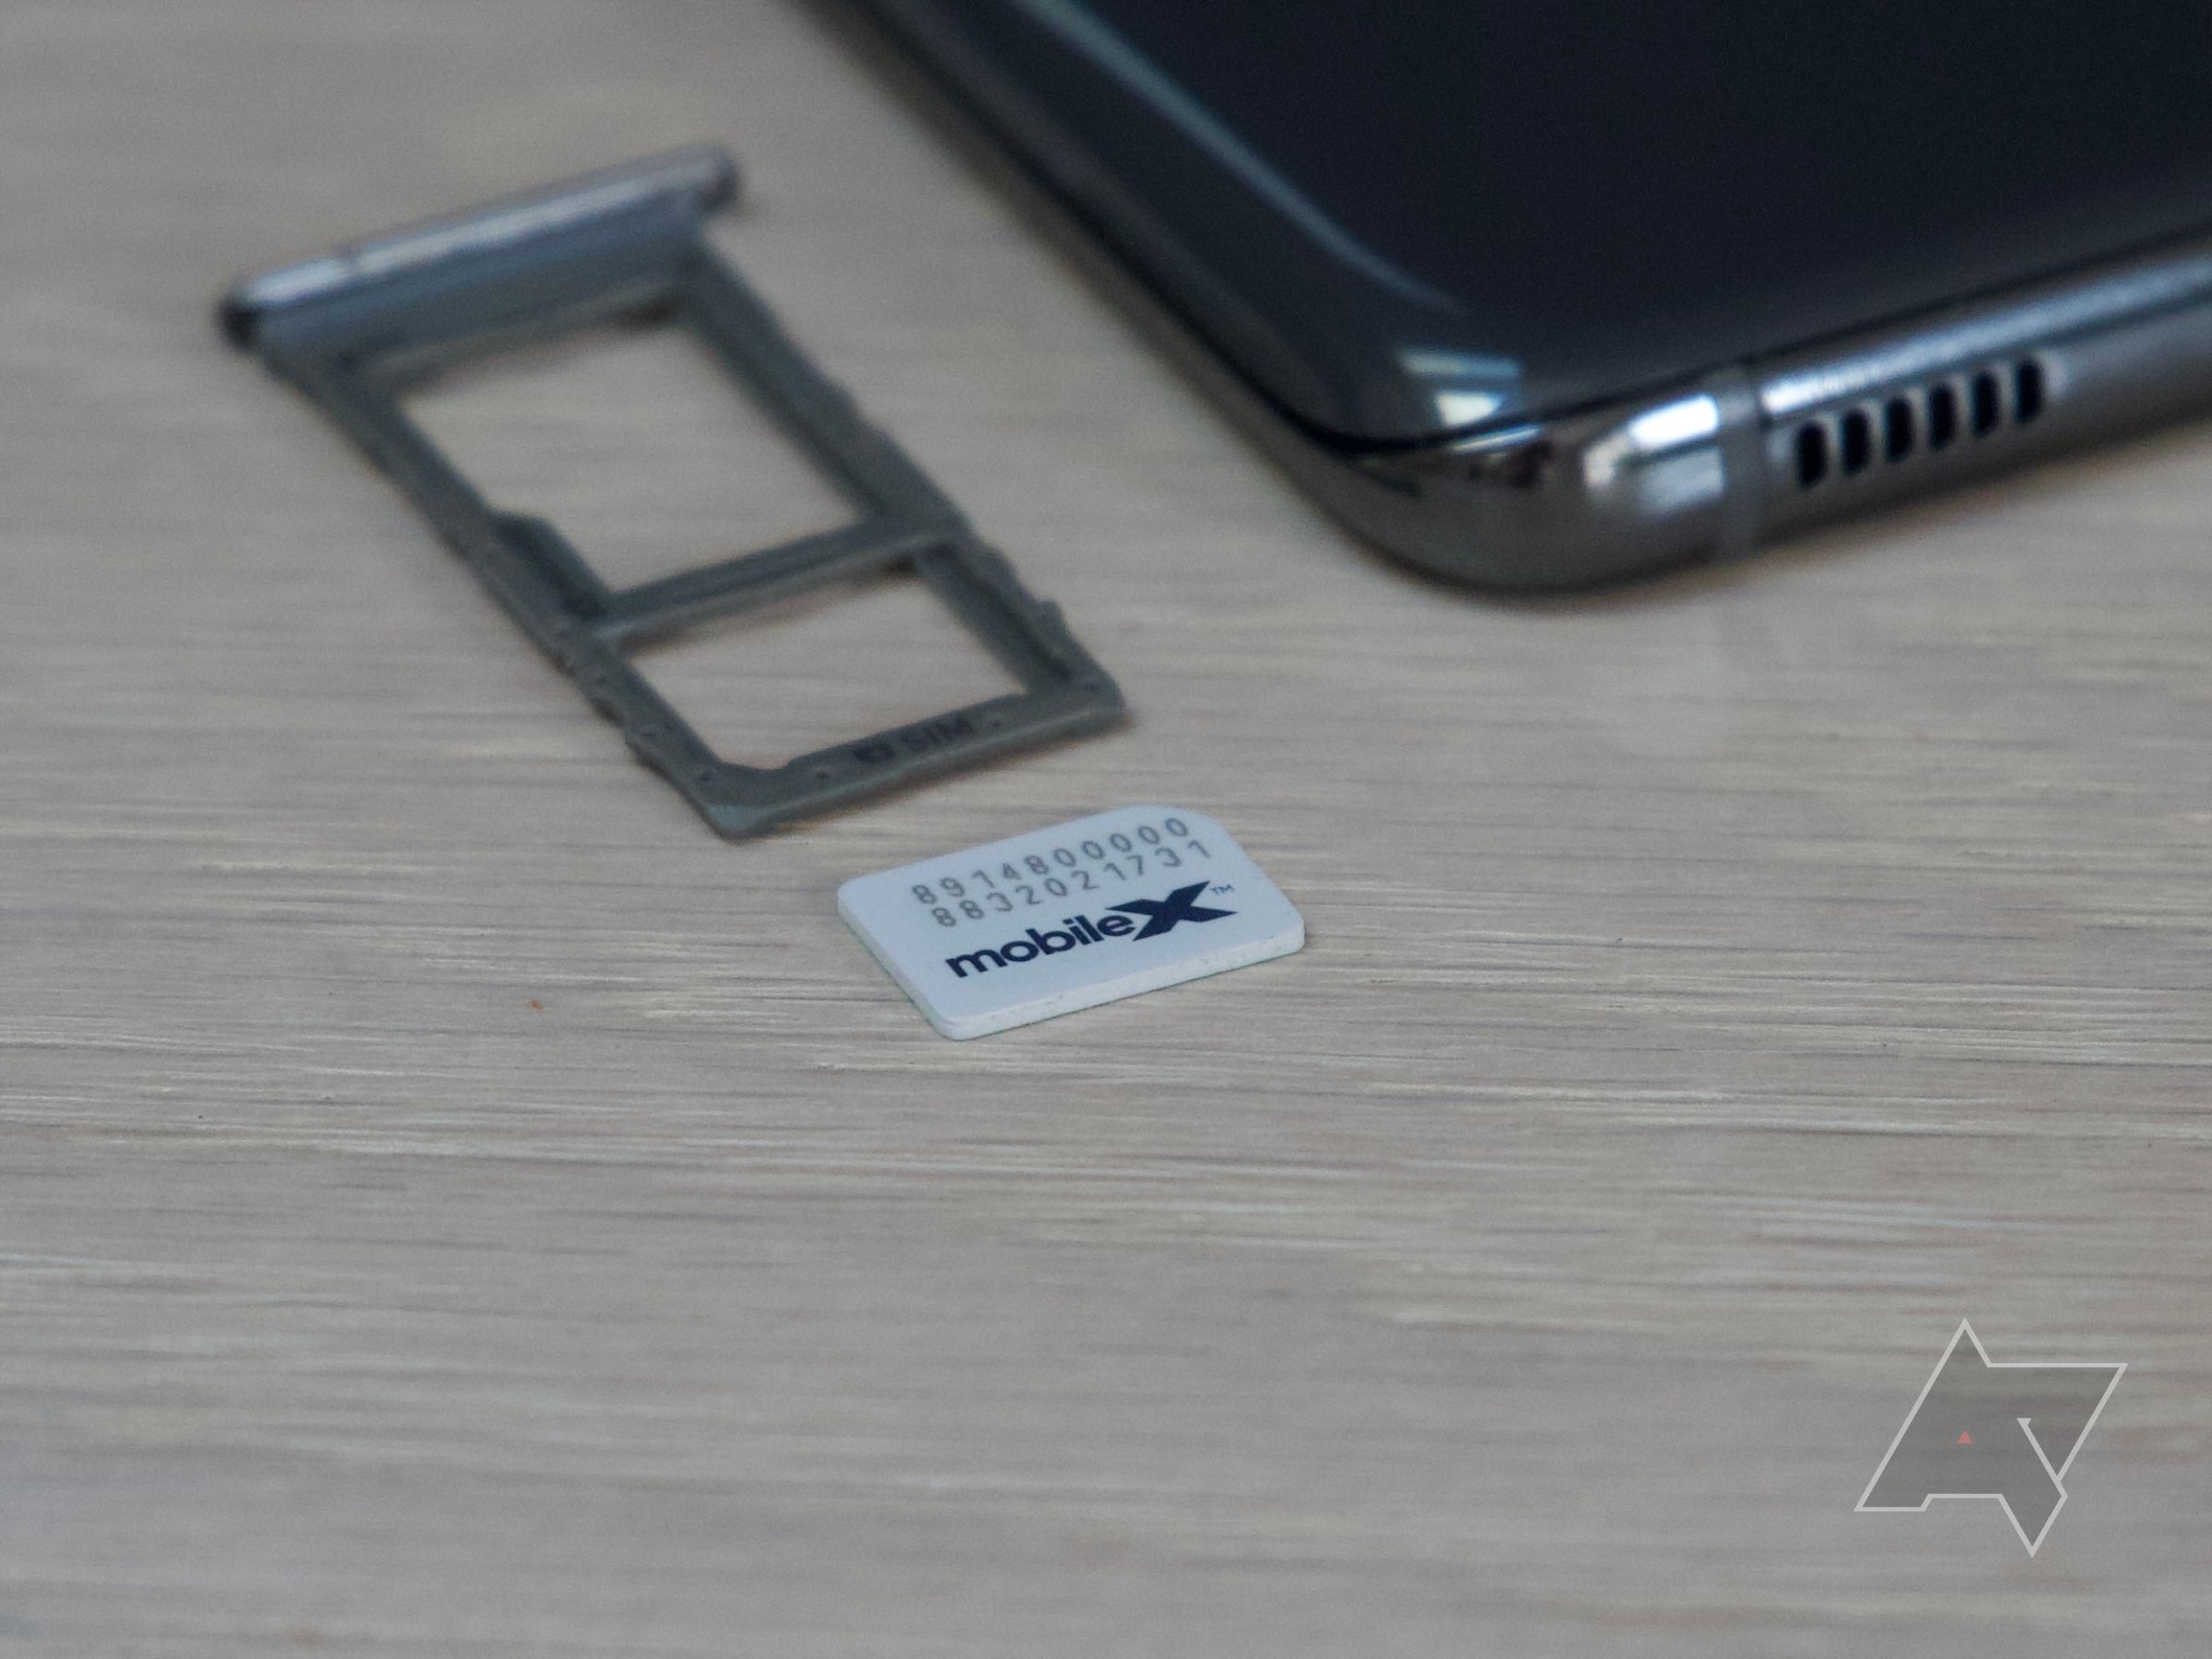 MobileX can be set up using an eSIM or physical SIM